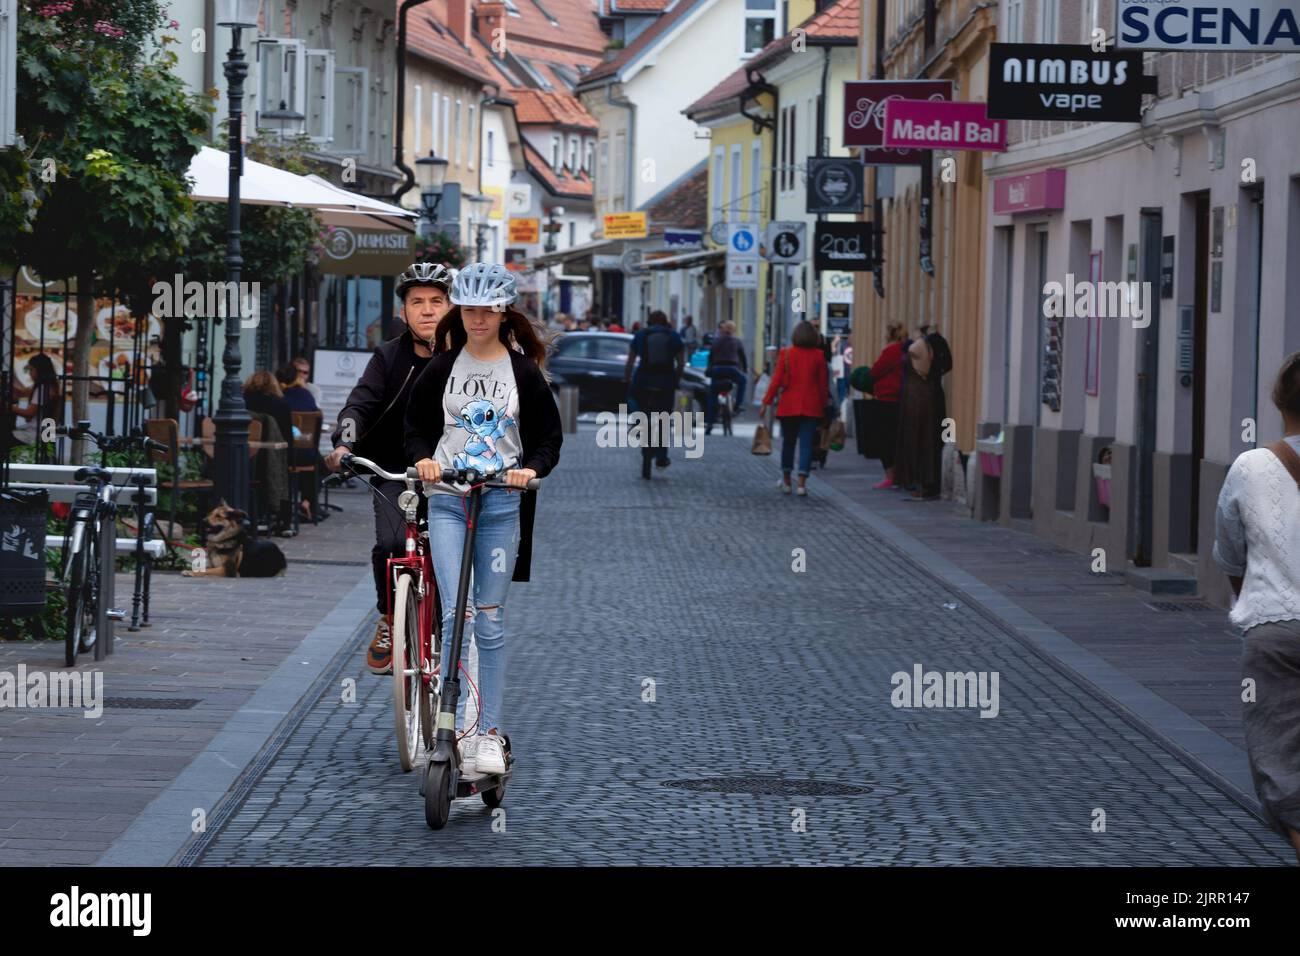 Picture of a girlstanding in a street of Ljubljana riding electric scooters in a pedestrian alley in Slovenia. Stock Photo